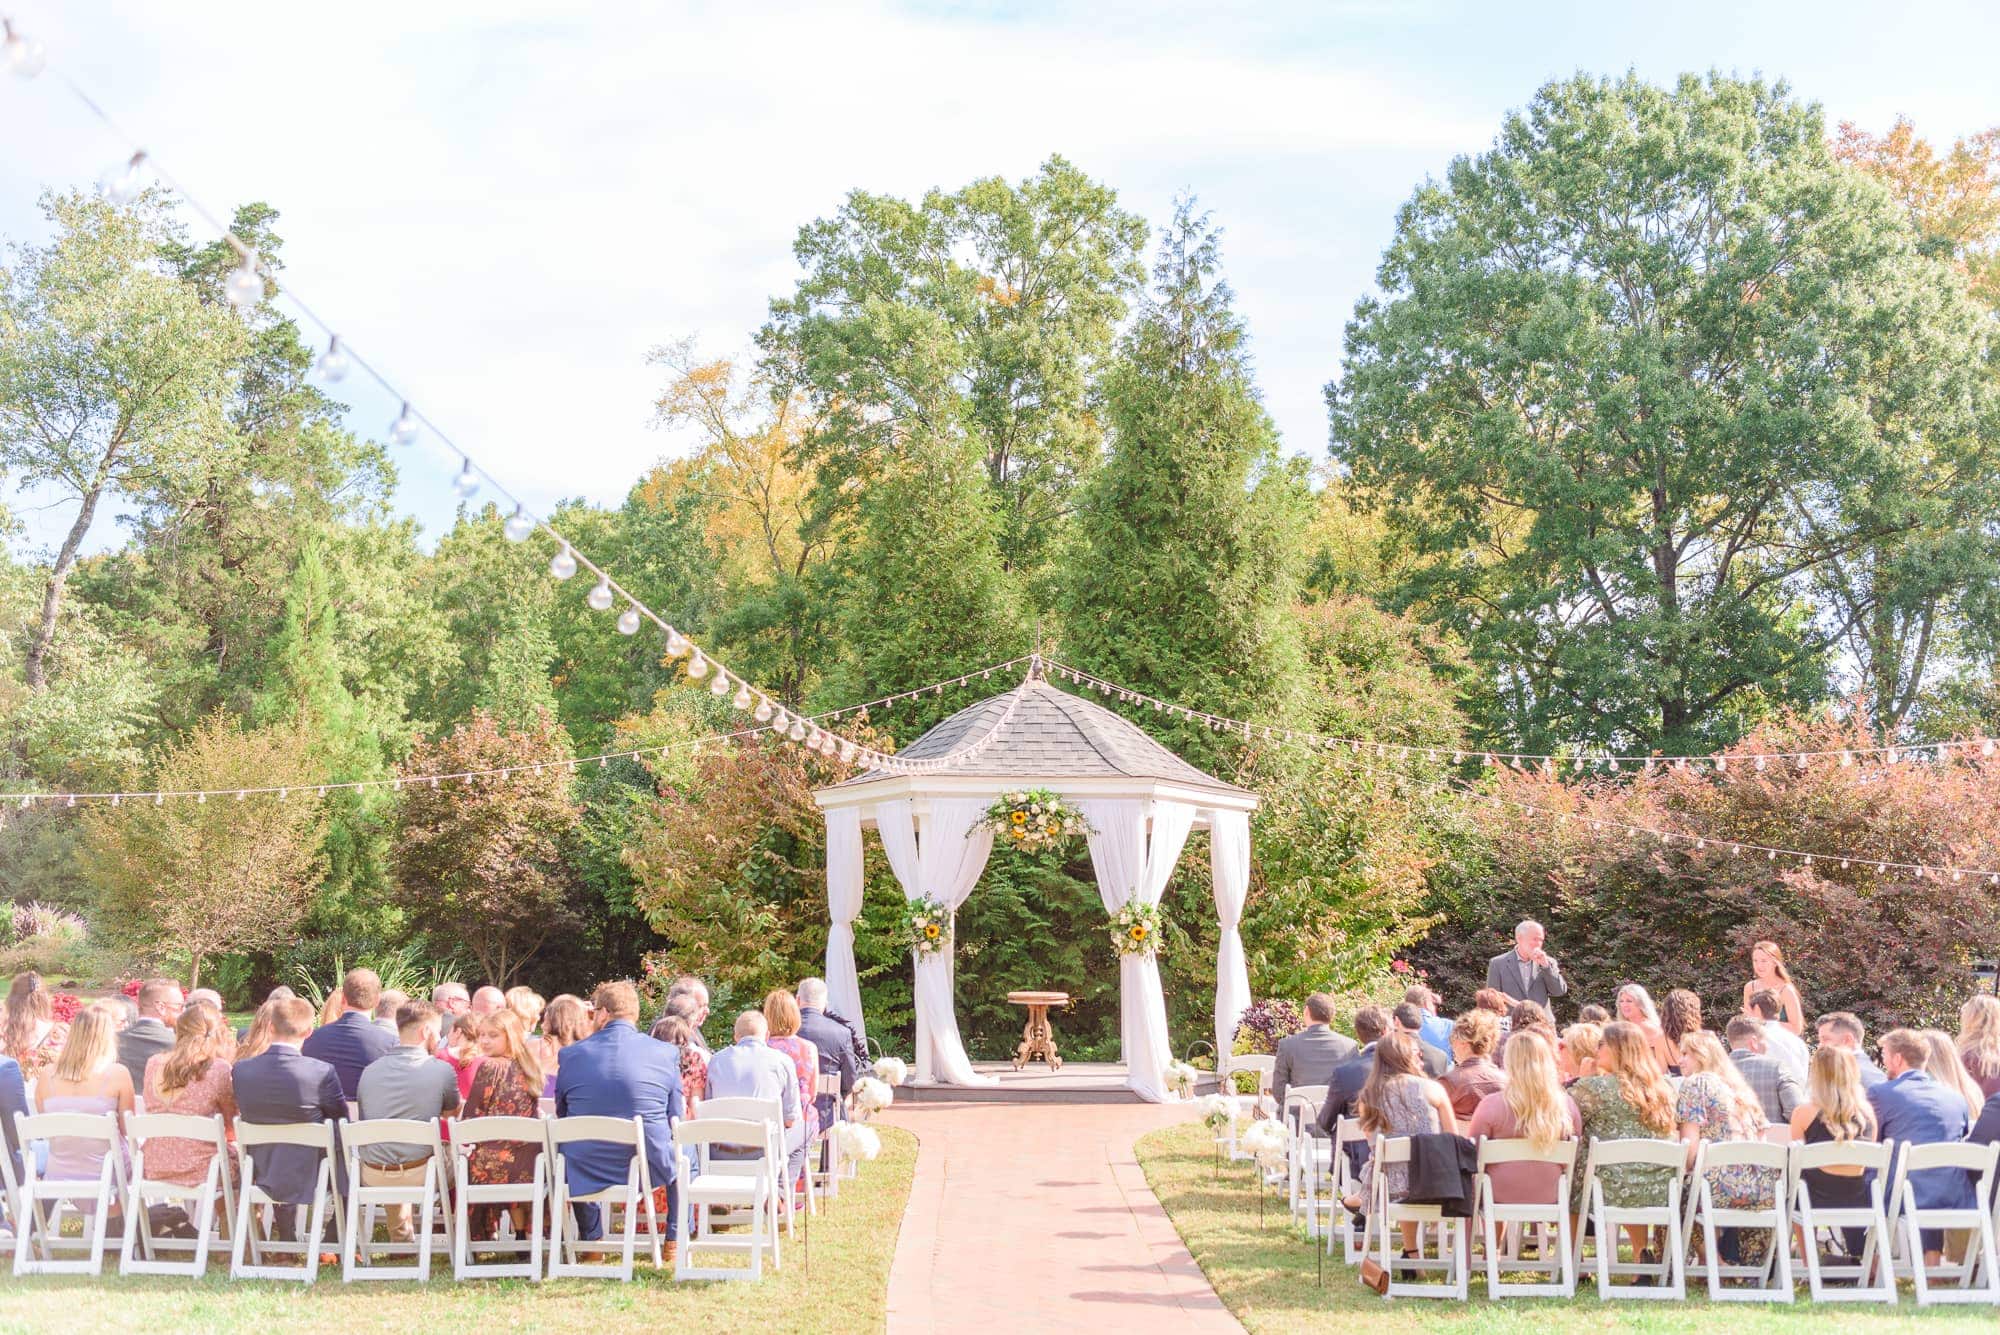 The ceremony site at Alexander Homestead in Charlotte has a beautiful gazebo on the lawn.